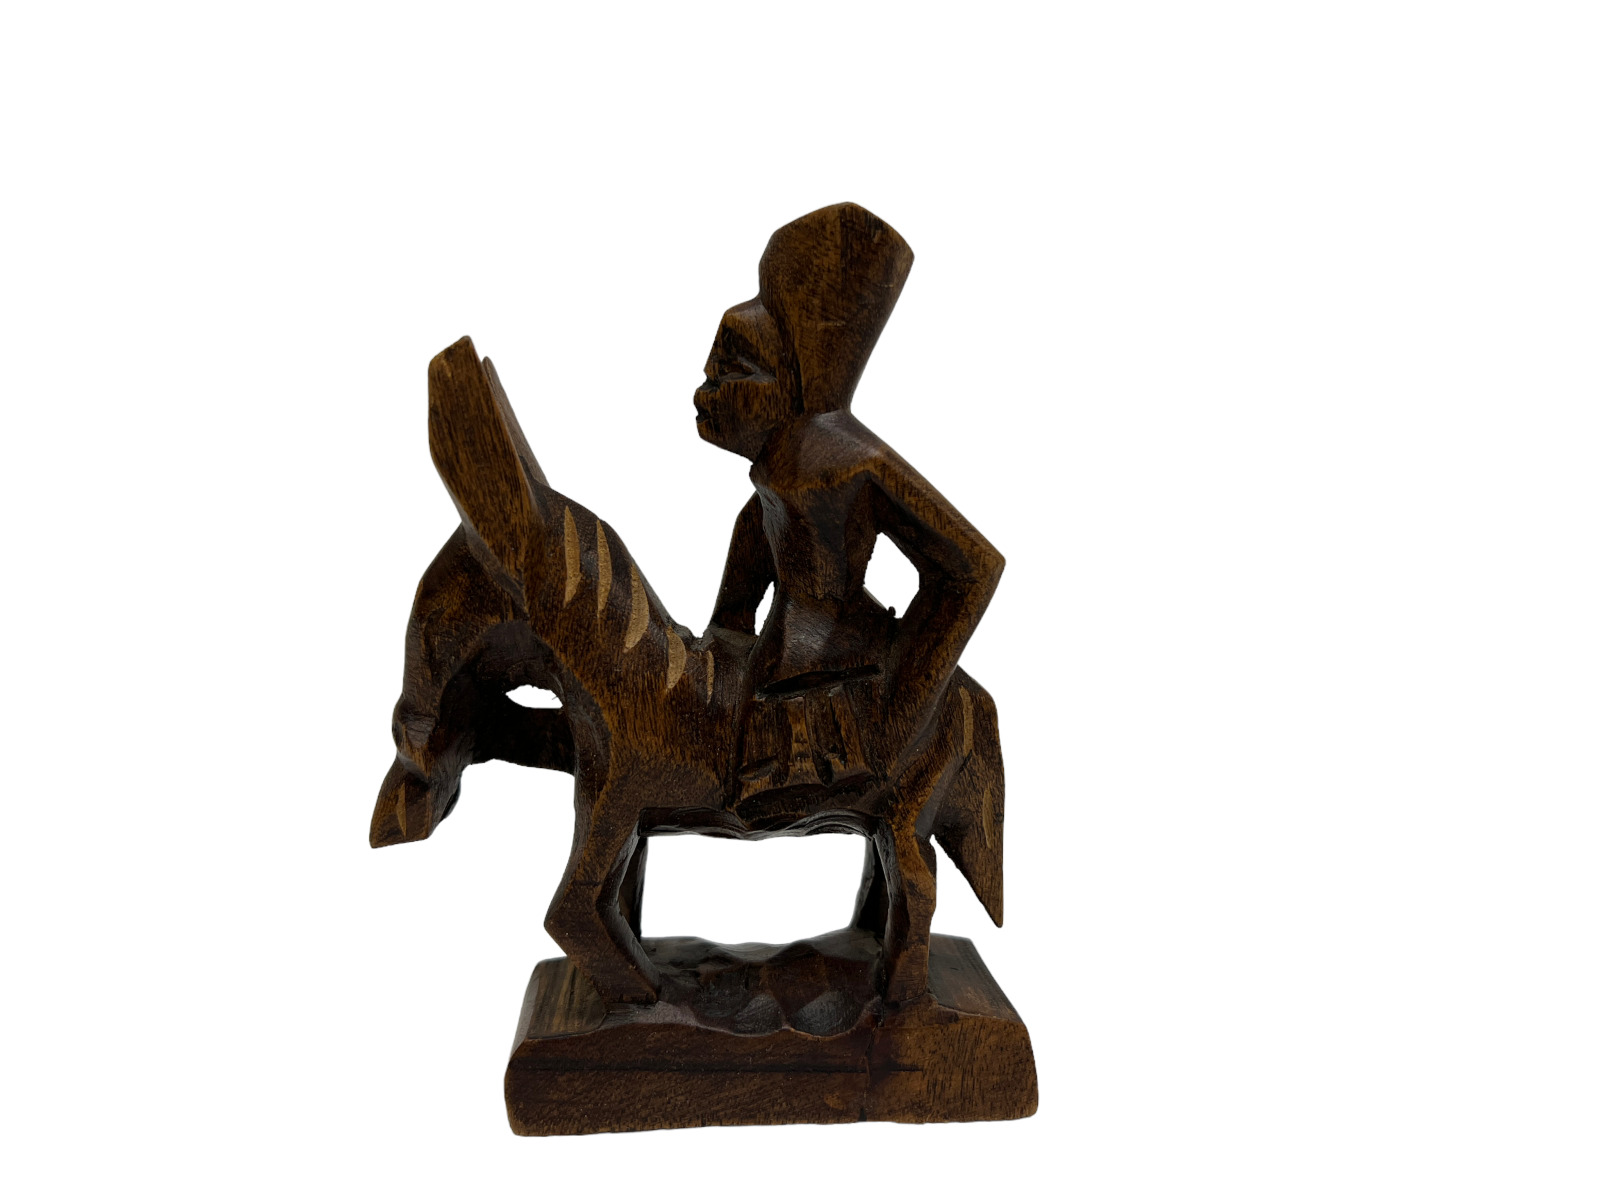 Vintage Artisan Wood Figure Hand Carved  Man on Donkey Home Decor Collectible